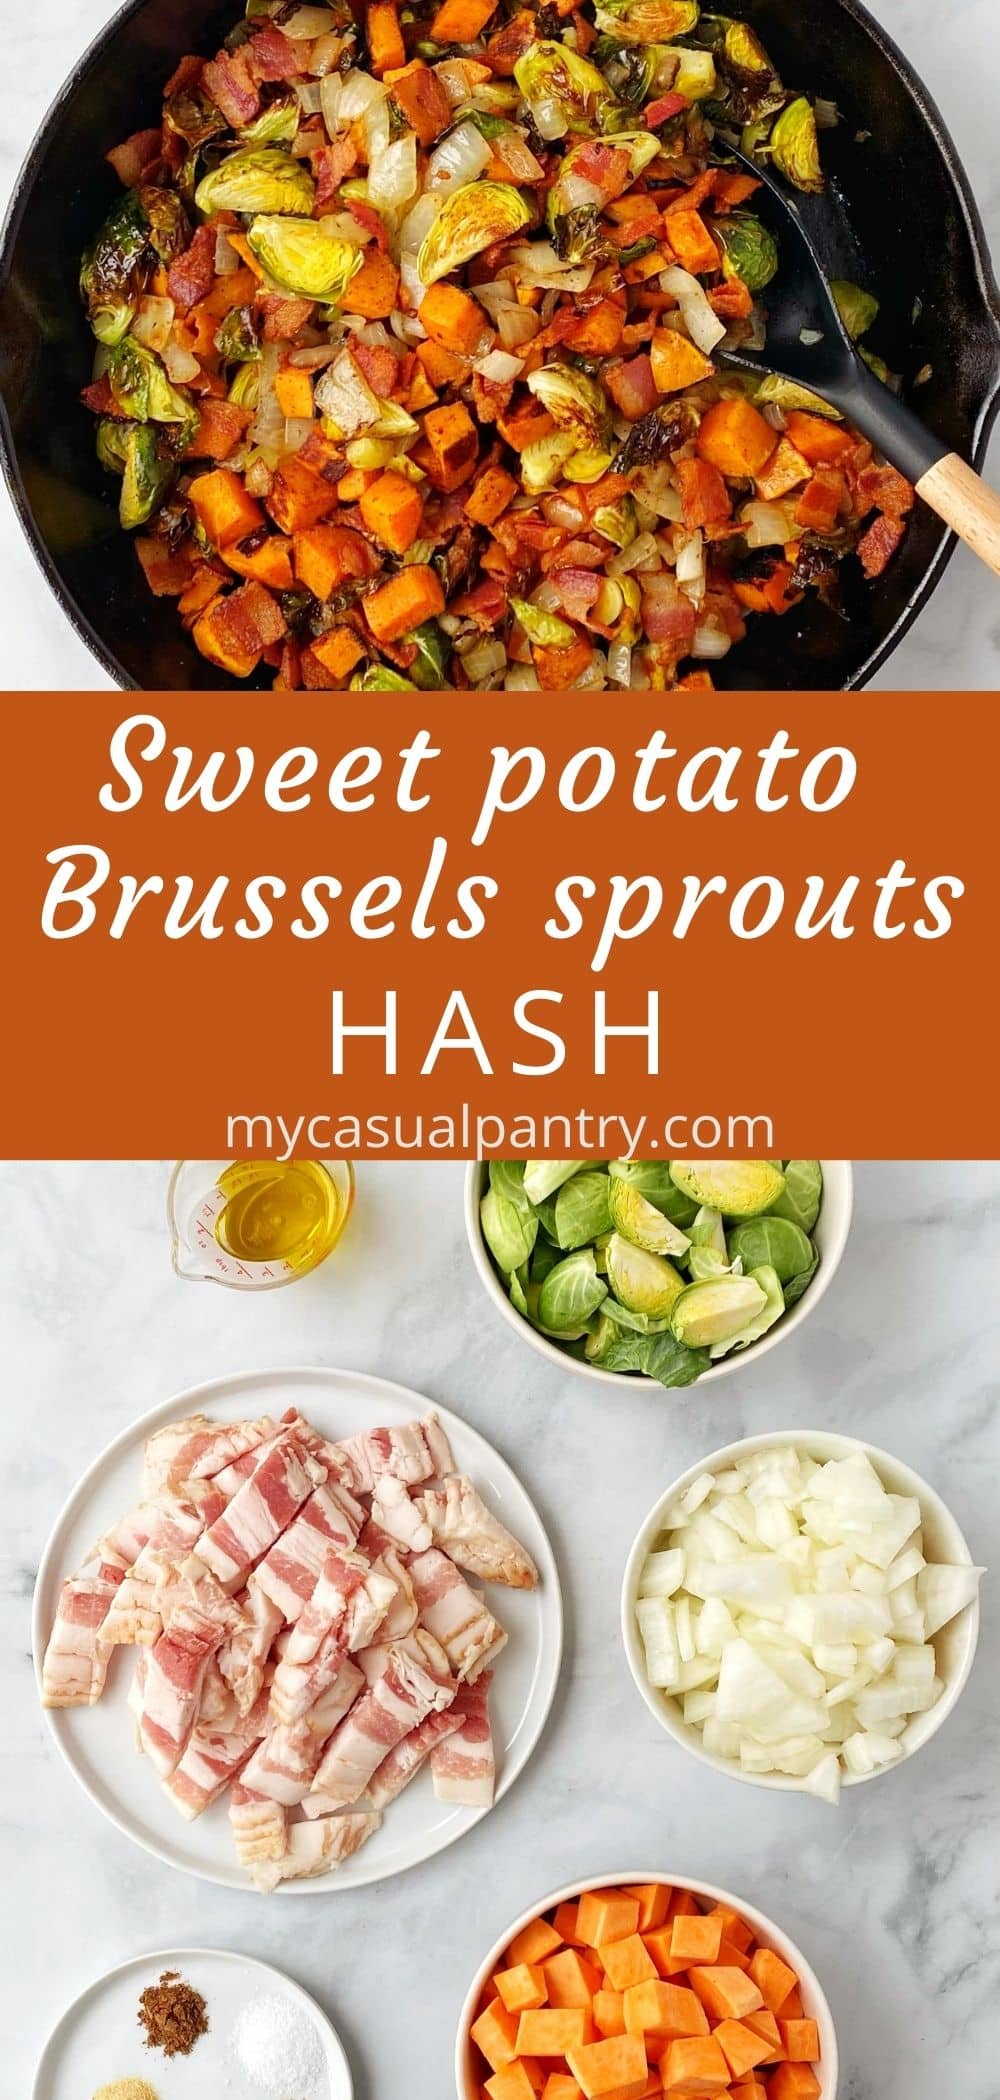 Roasted Sweet Potato Brussels Sprouts Hash - My Casual Pantry